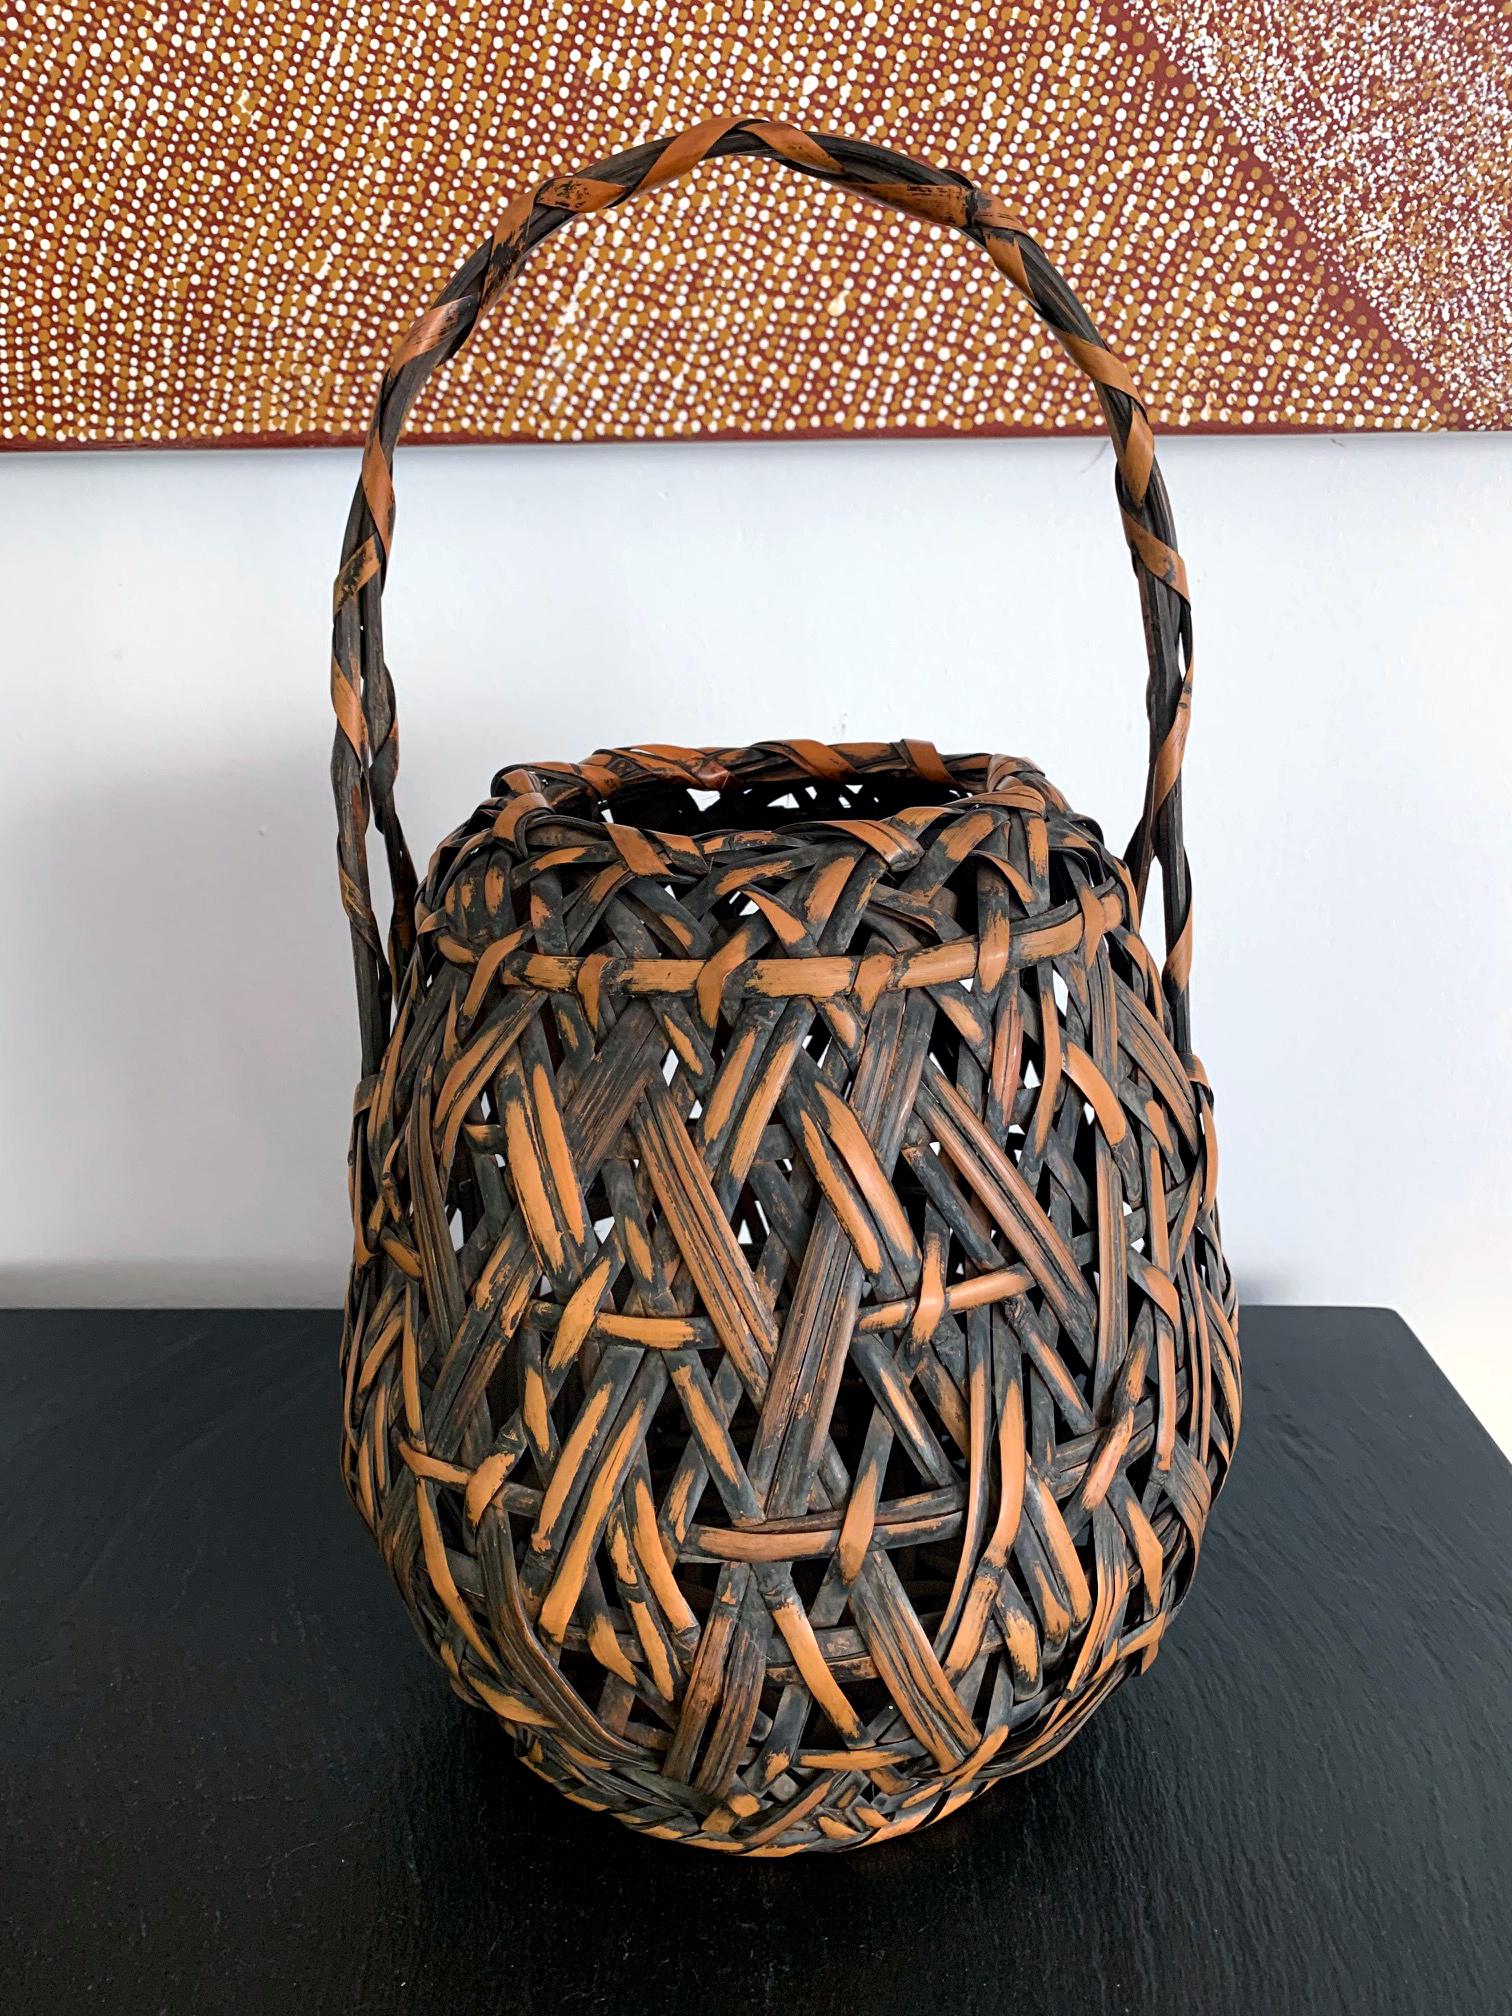 A Japanese bamboo Ikebana basket by Iizuka Hochiku (1883-?; active approximately 1900s-1940s). Hochiku was born in Tochigi Prefecture Kanto region and active in Tokyo. He was the third son of Iizuka Hosai I (1851-1916) and studied under him.
This